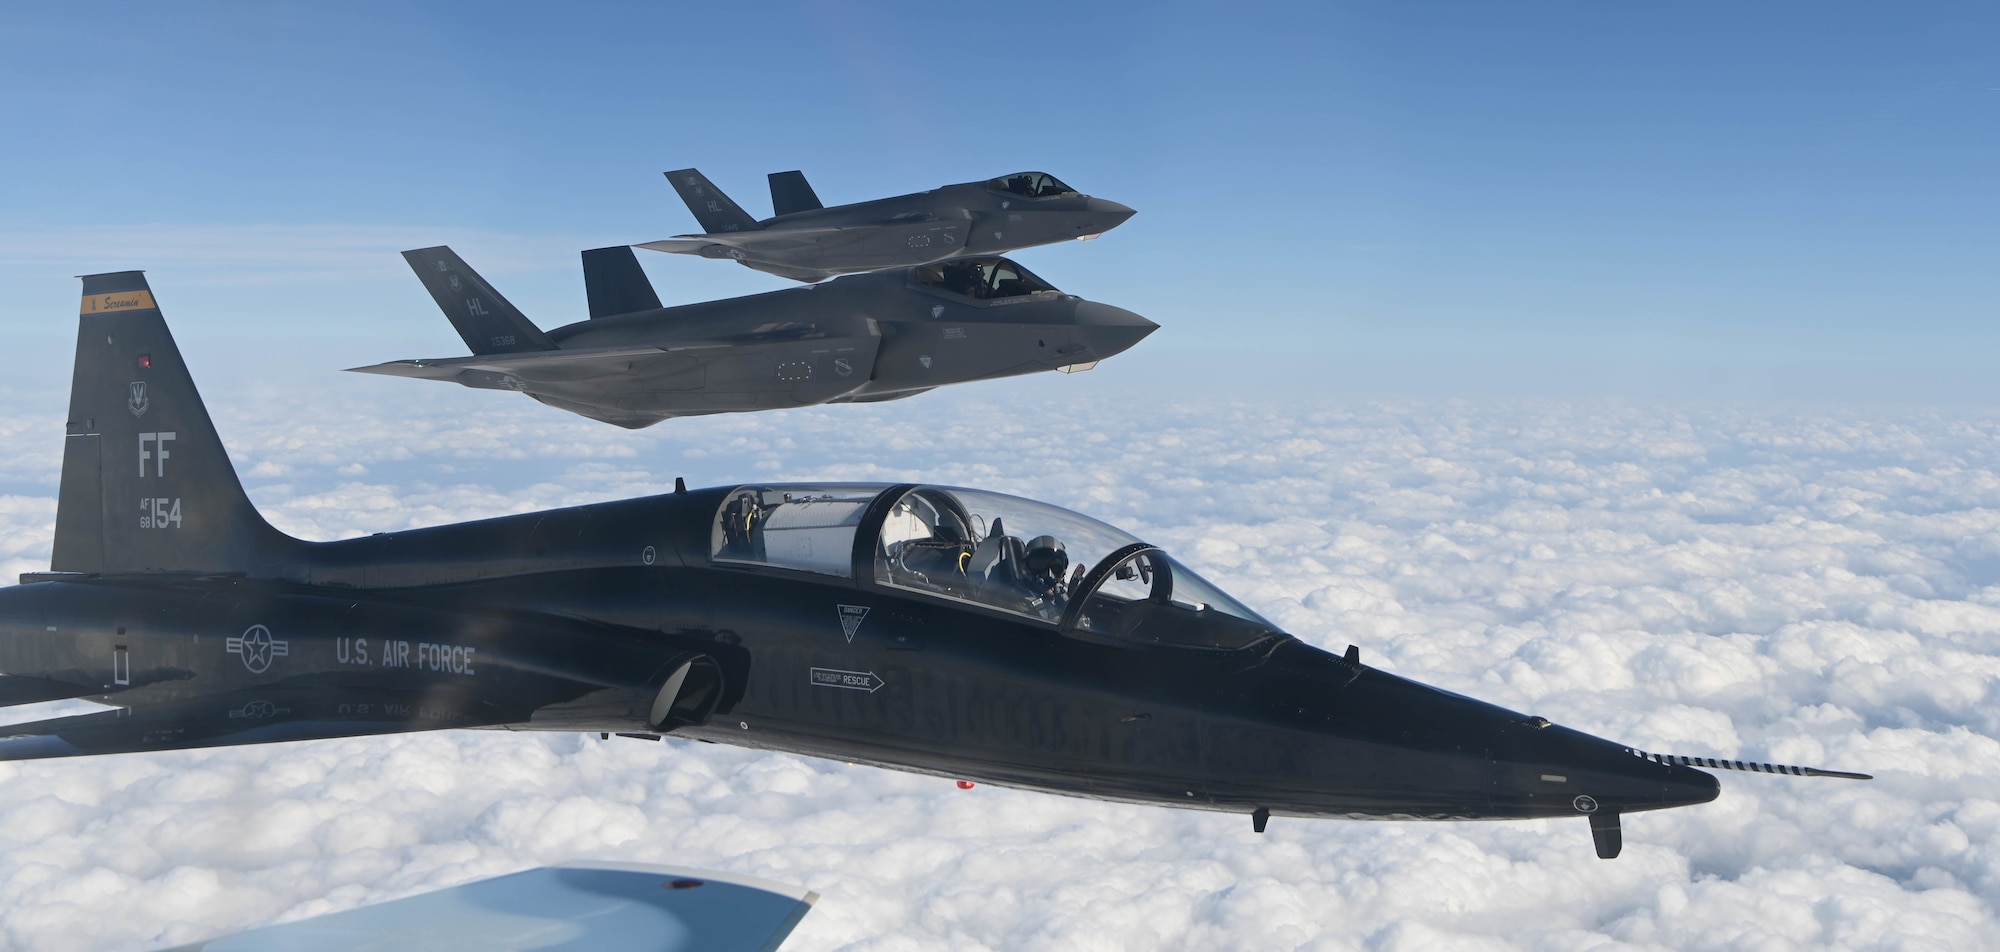 U.S. Air Force T-38 Talon and two F-35 Lightning II's fly in formation over Whiteman Air Force Base, Missouri, April 5, 2022. The flying was to demonstrate the interoperability of the Air Force. (U.S Air Force photo by Airman Joseph Garcia)